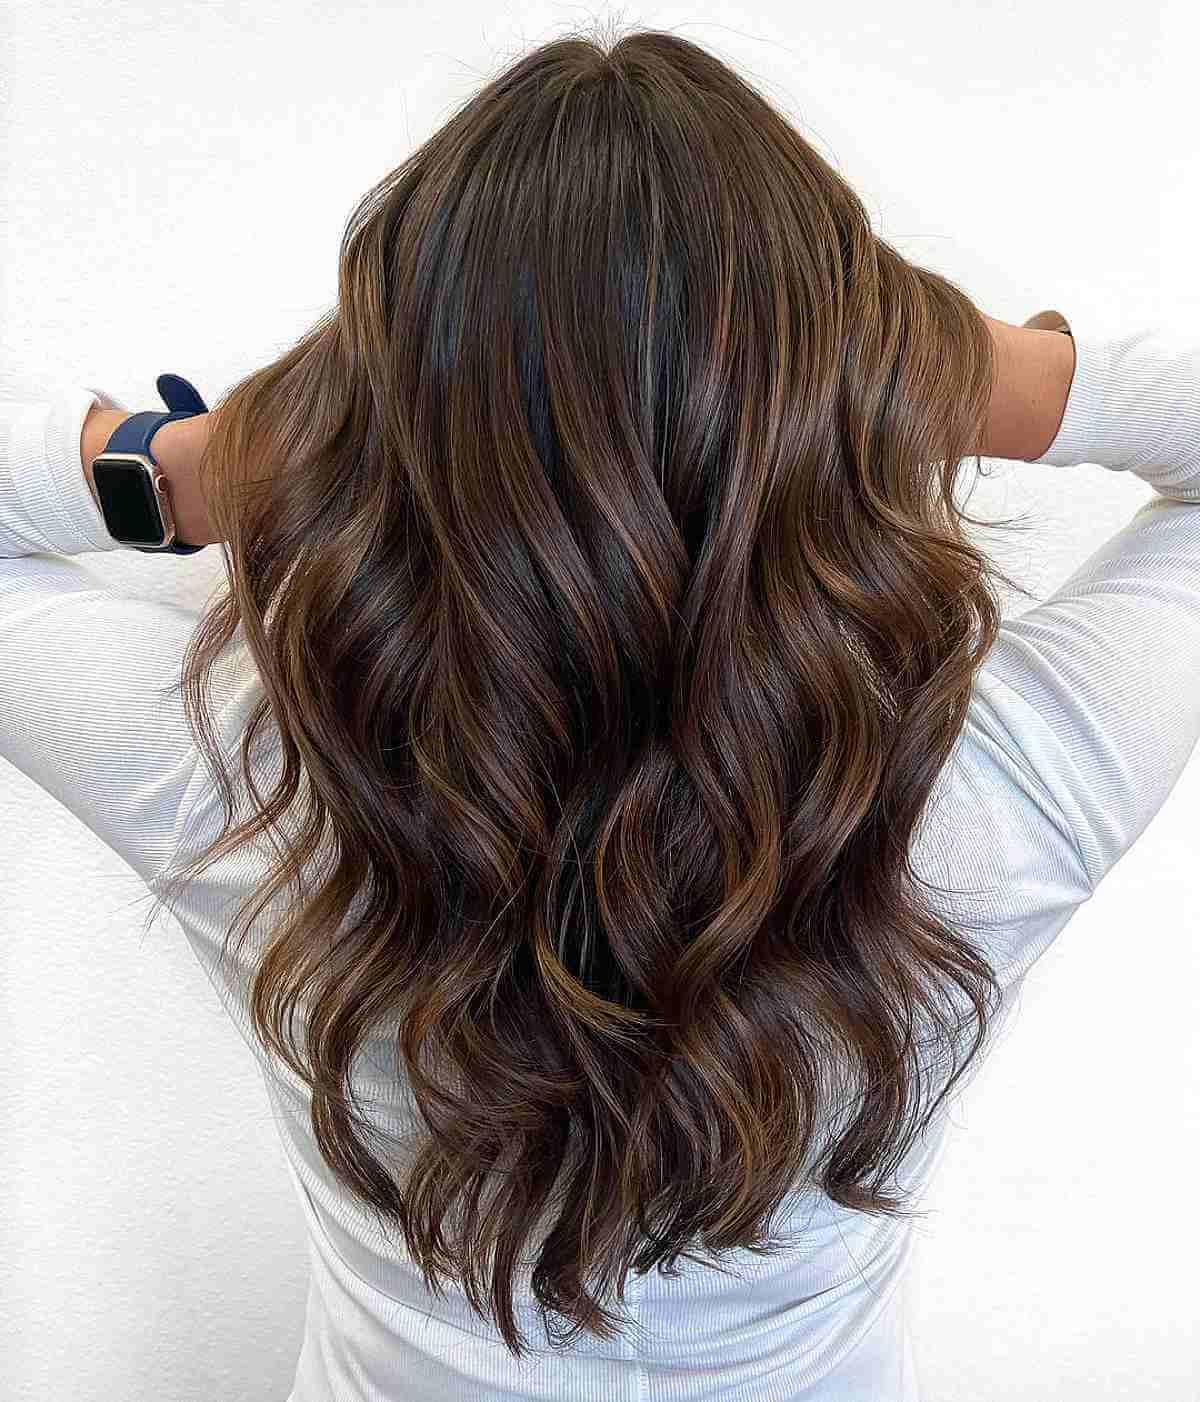 Details more than 80 cocoa hair color super hot